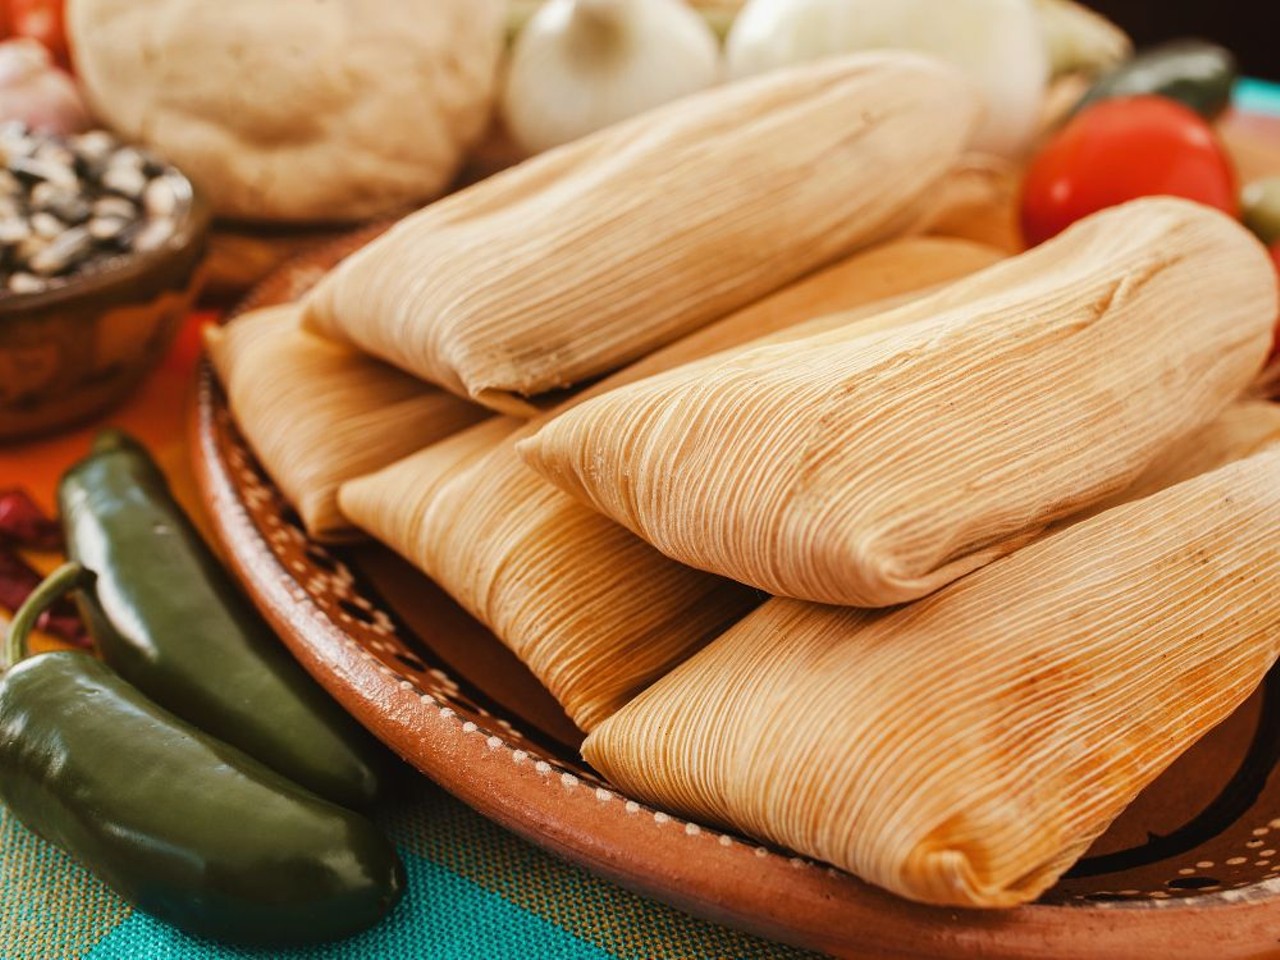 Stock up on holiday tamales
There's no culinary delight that captures SA holiday tradition like tamales. There’s tons of spots offering tasty tamales across town, including Delicious Tamales and Tamale Boy.